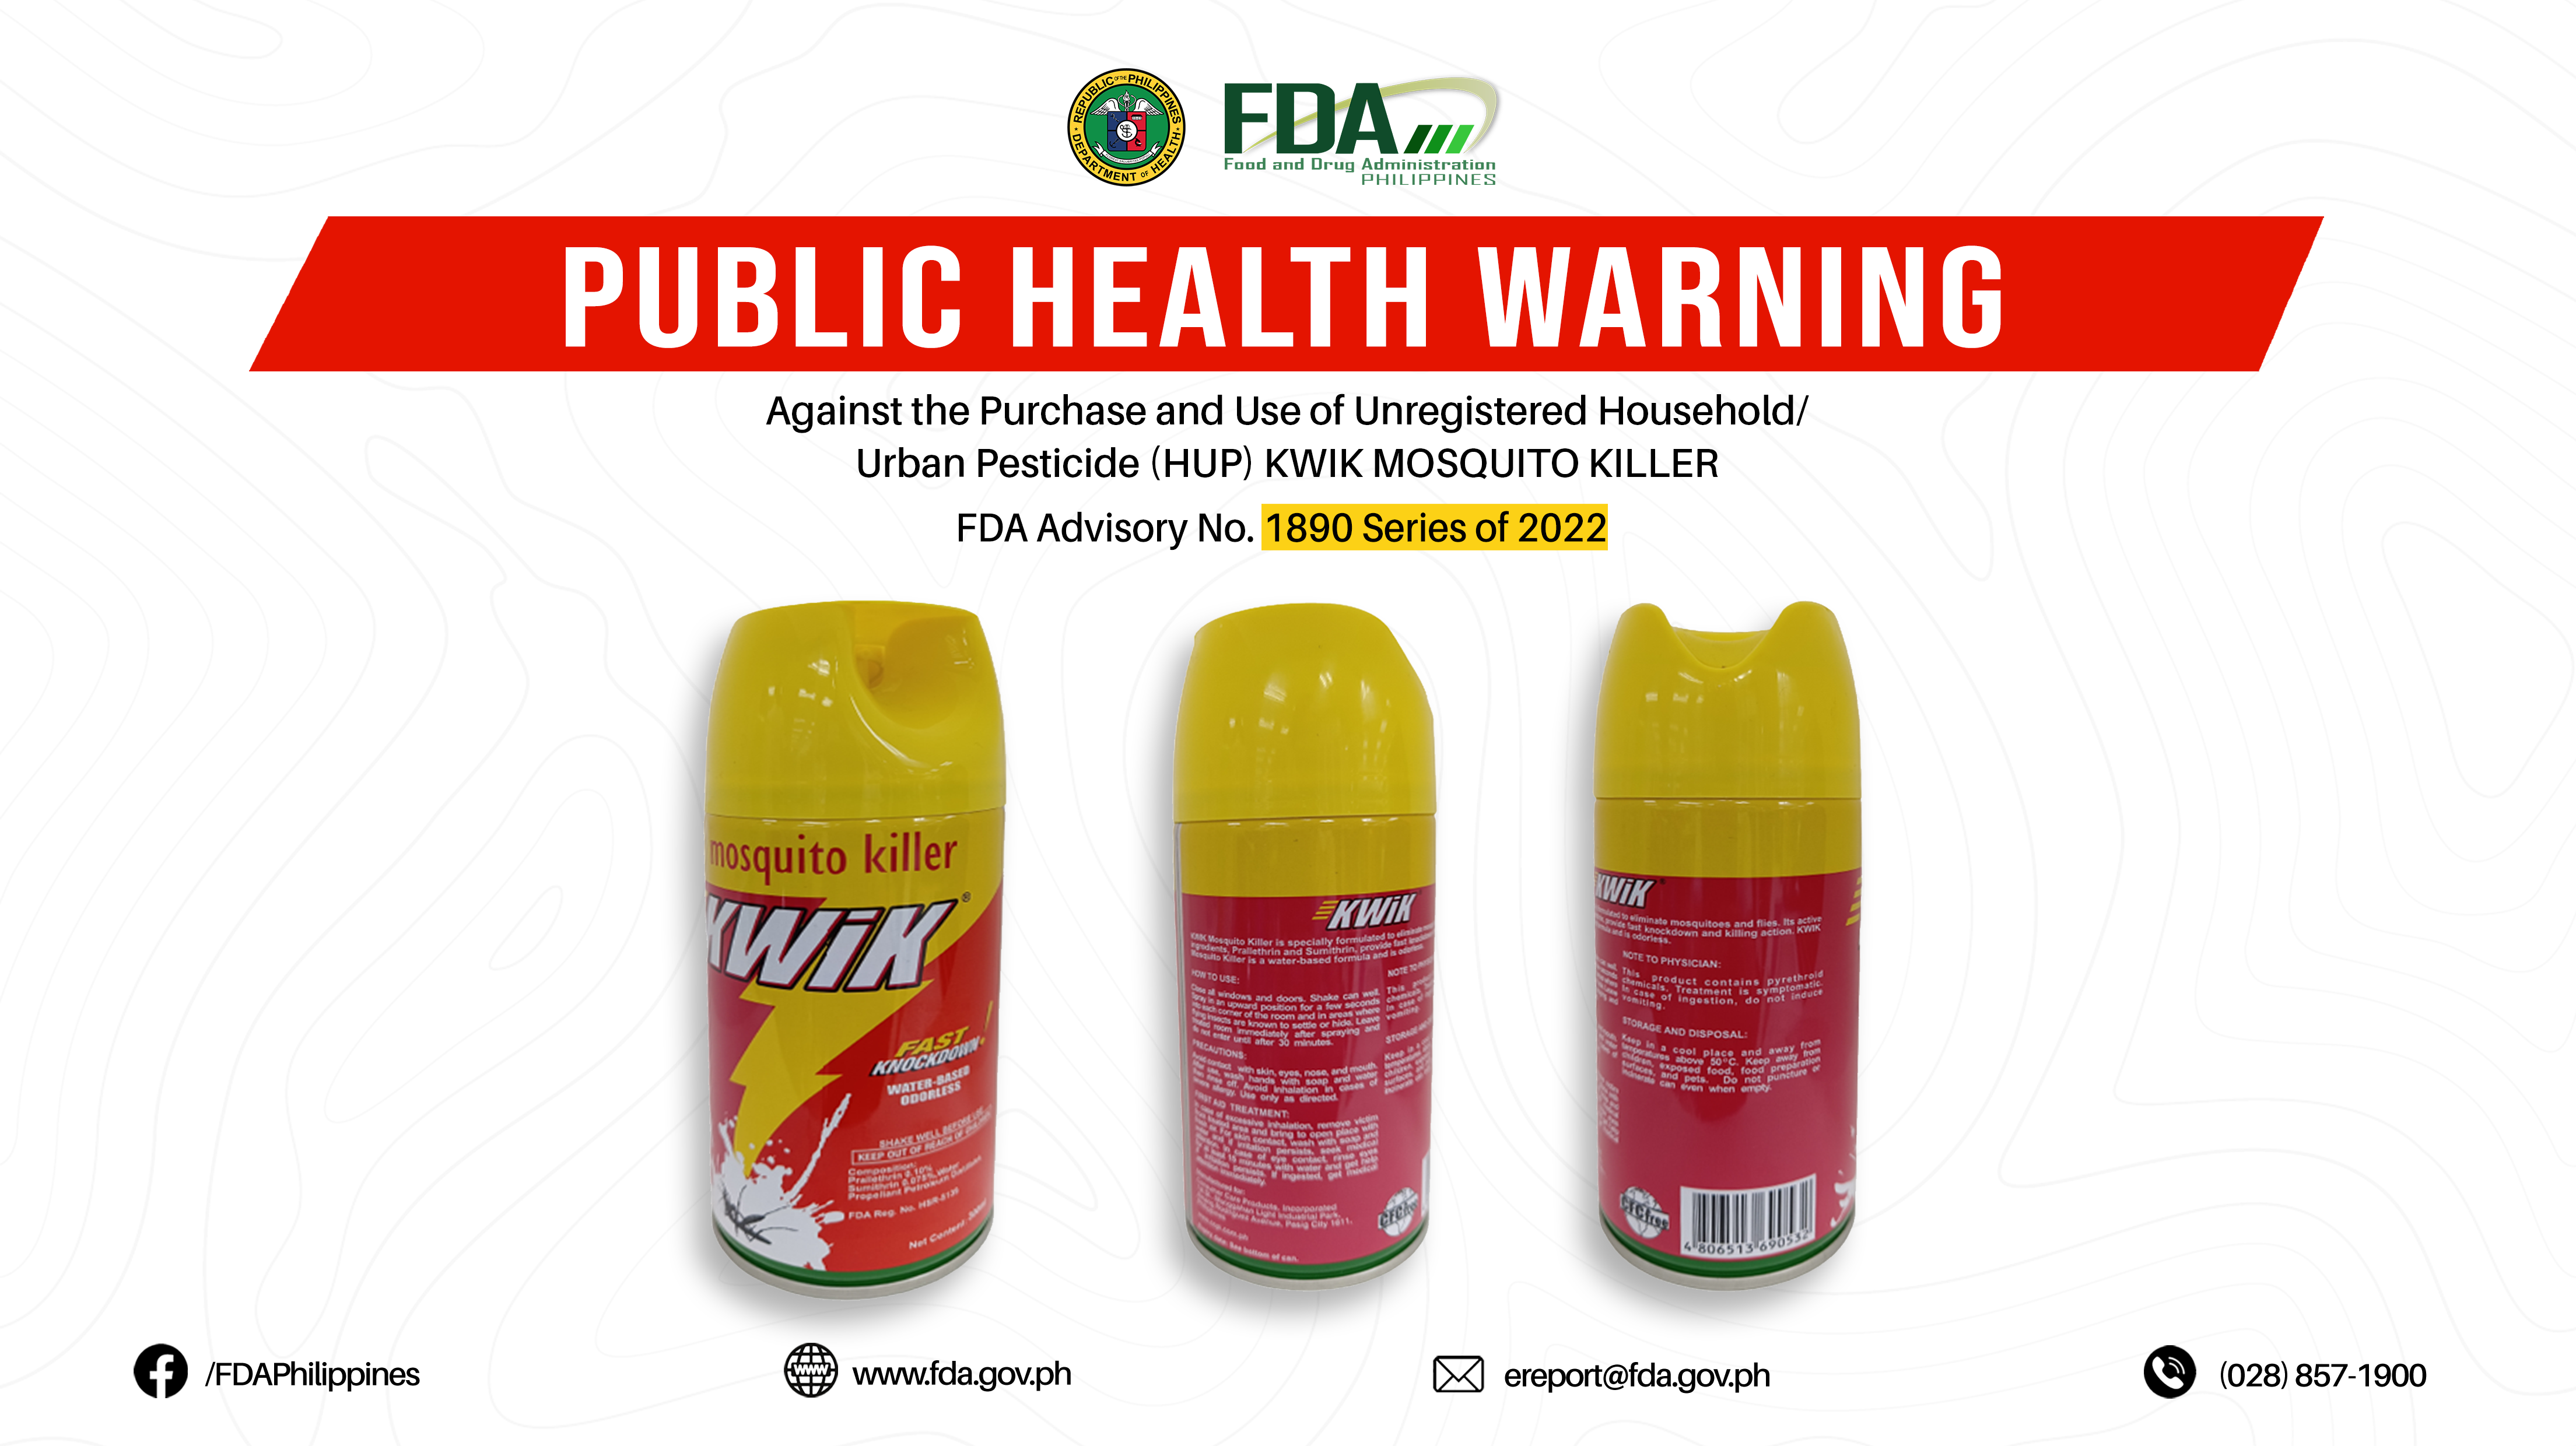 FDA Advisory No.2022-1890 || Public Health Warning Against the Purchase and Use of Unregistered Household/Urban Pesticide (HUP) KWIK MOSQUITO KILLER